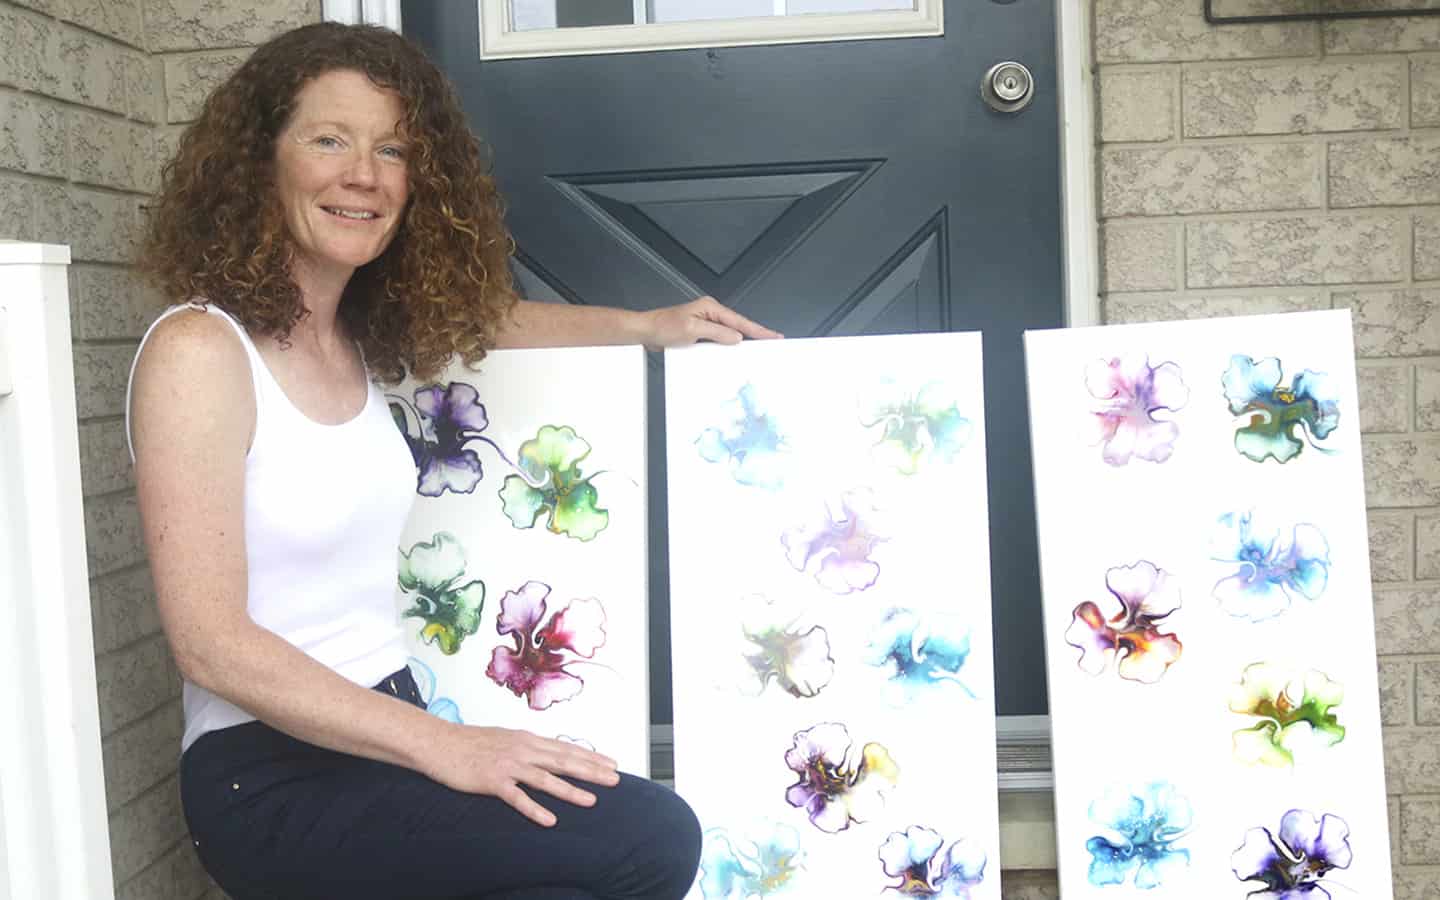 Local artist turns her passion into a way to help others